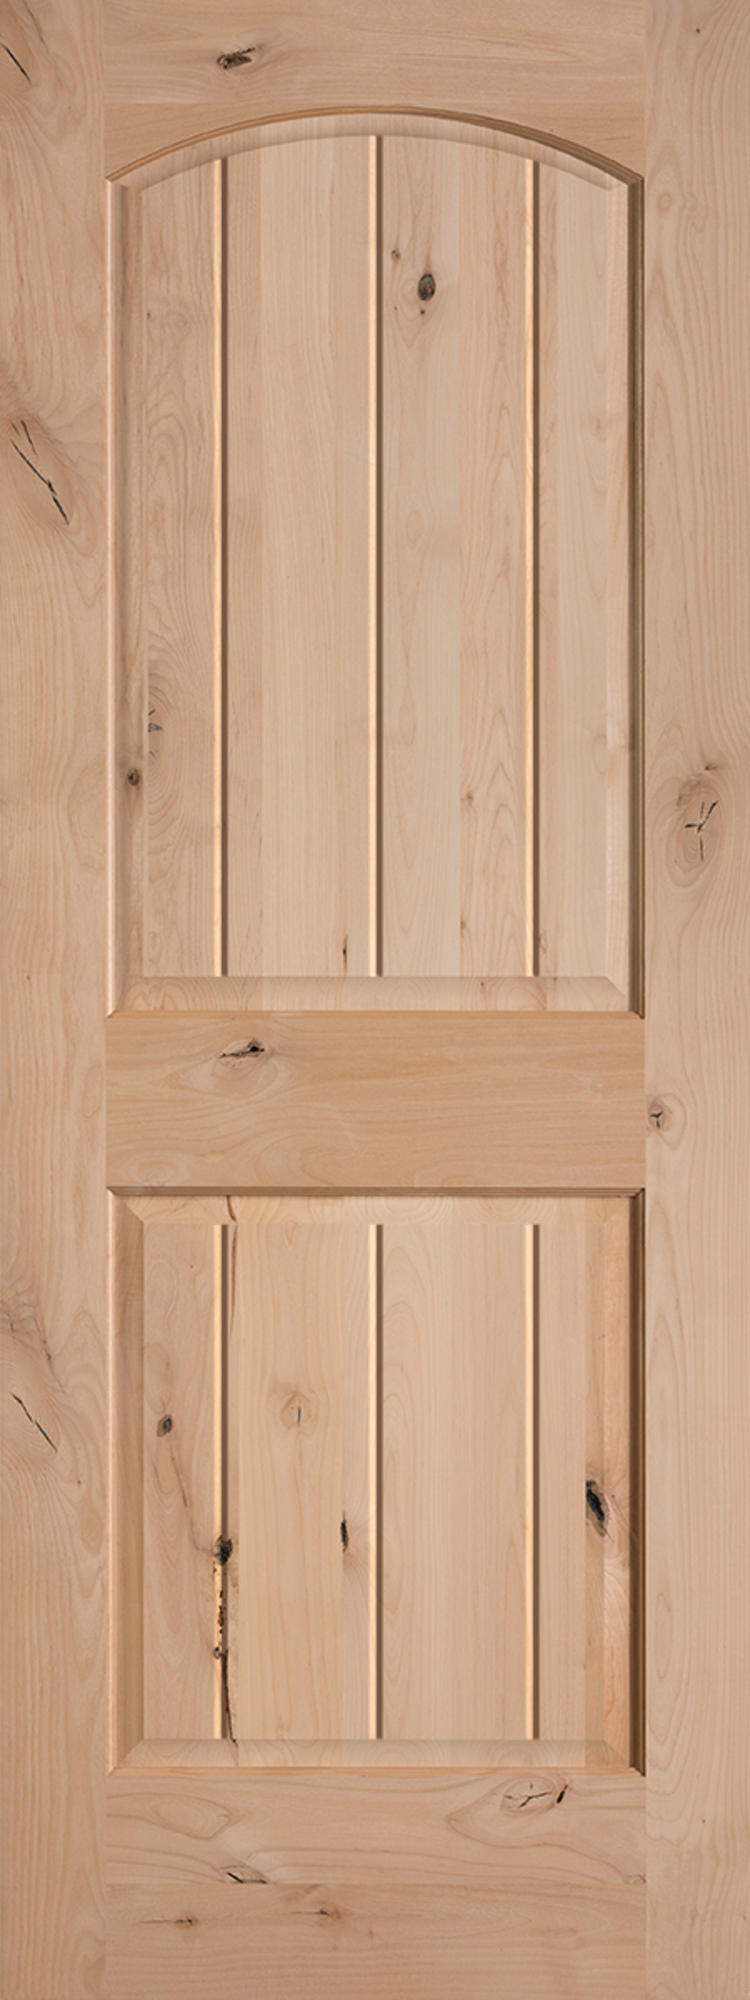 Knotty alder wood door features a square panel topped by an arched panel, with V-shaped grooves to add dimension